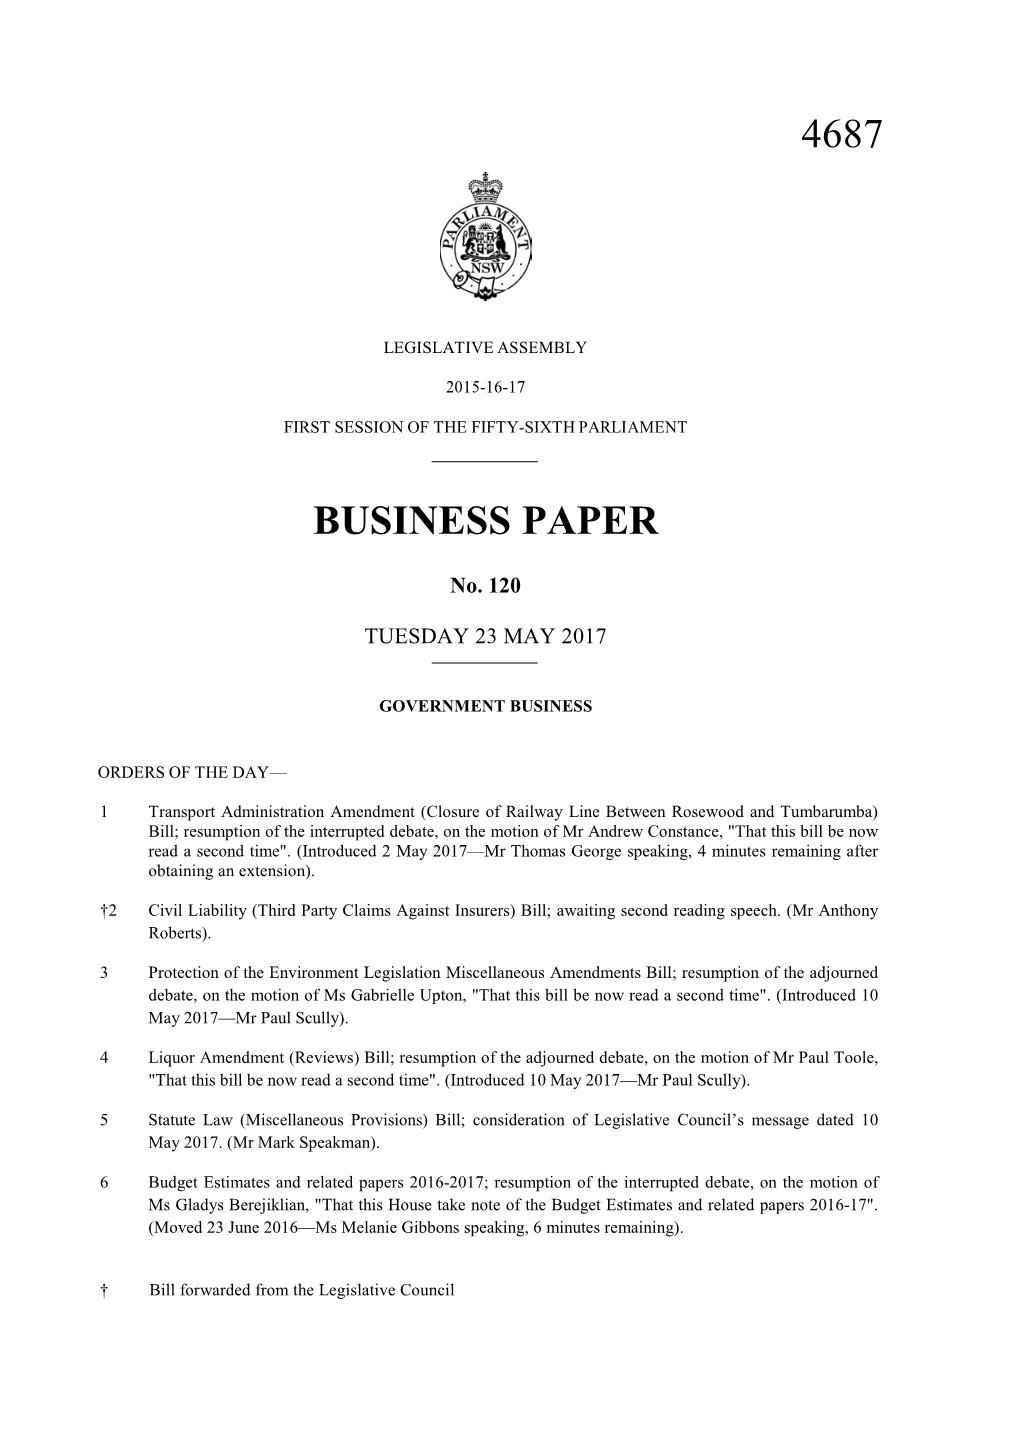 4687 Business Paper